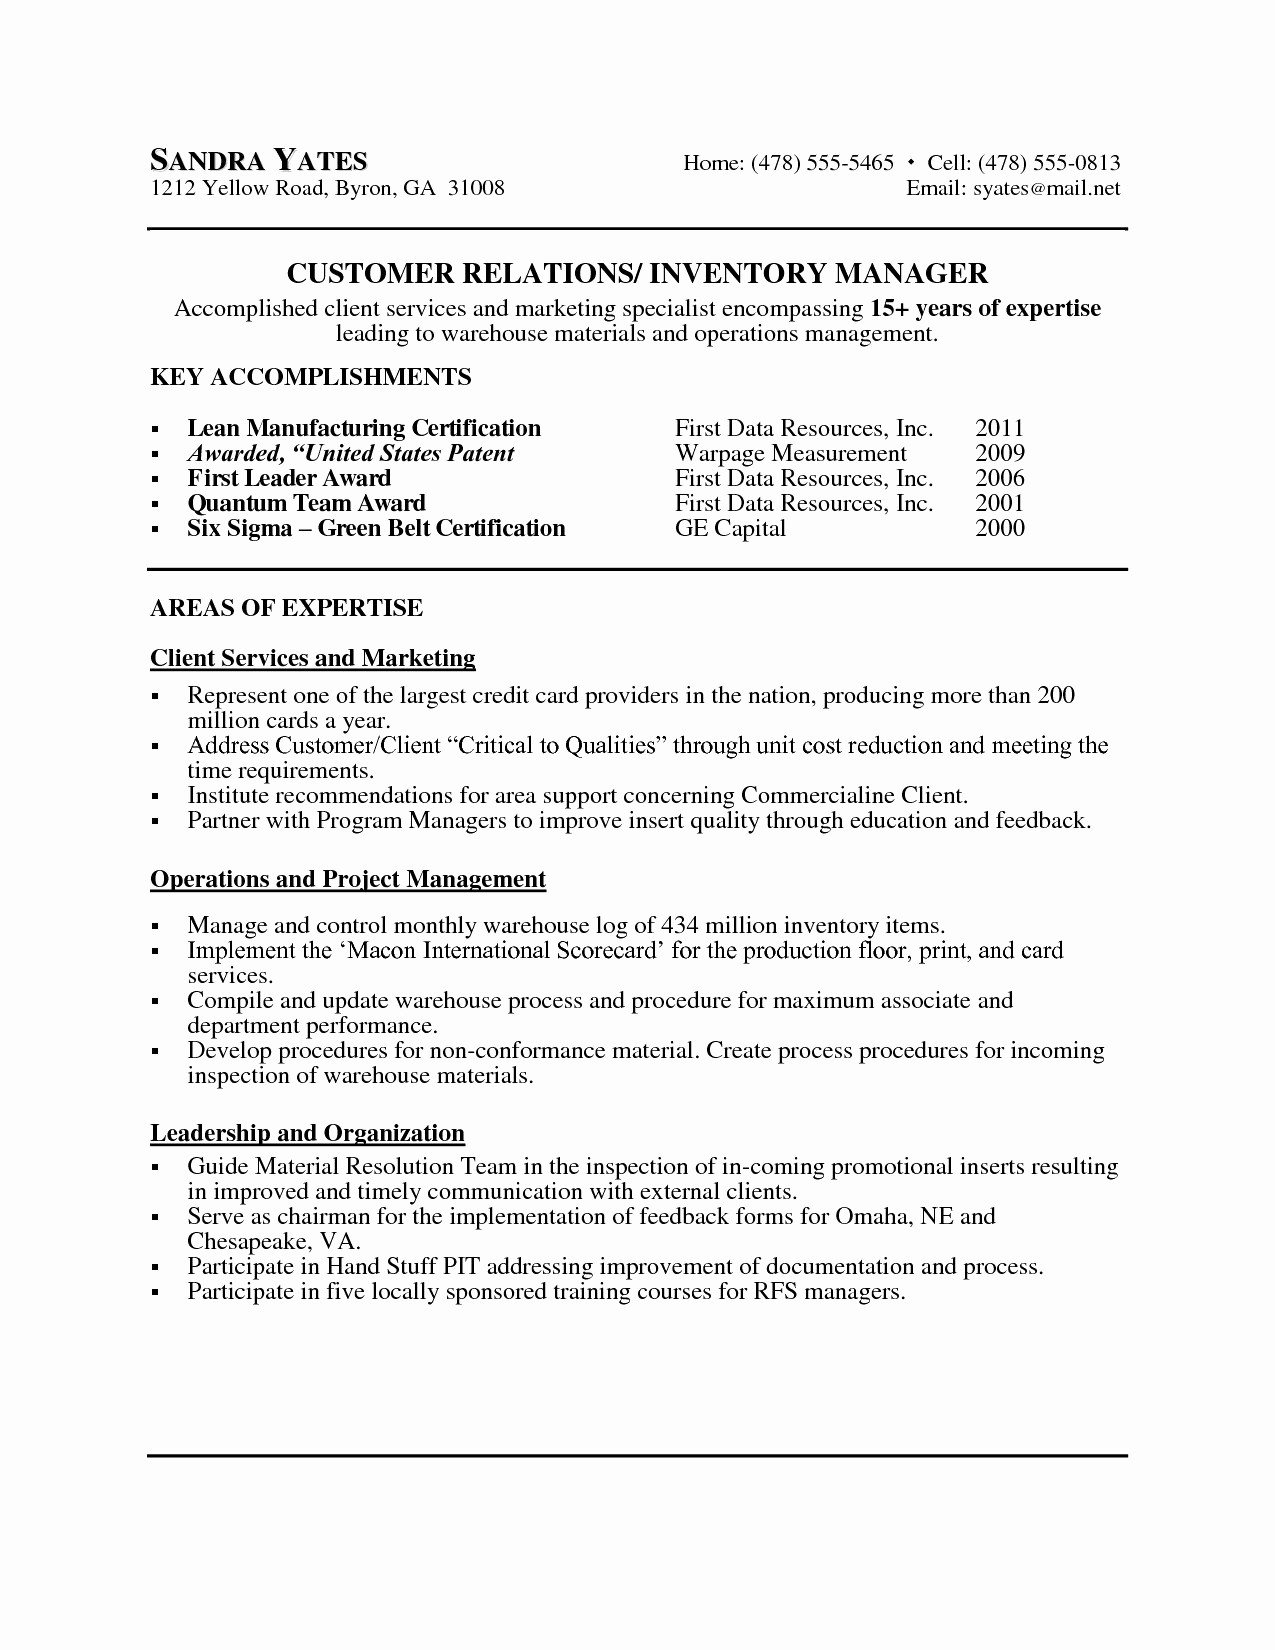 Help Desk Cover Letter Template - Cover Letter Examples for Resumes Luxury 20 Resume with Cover Letter